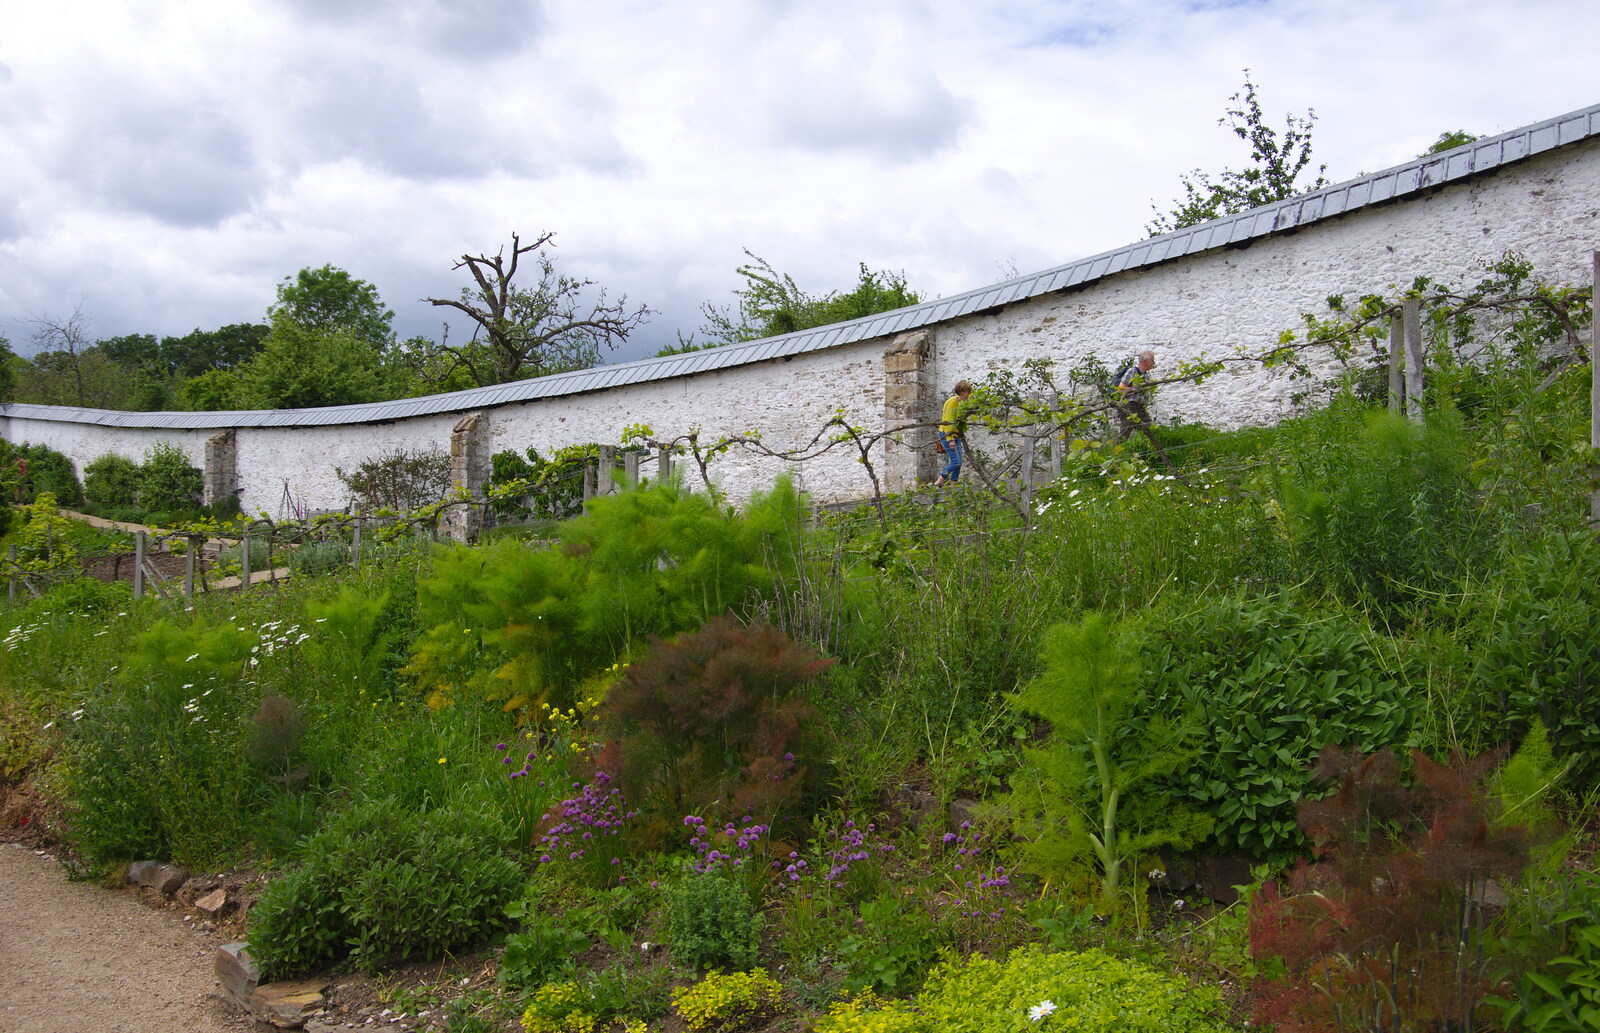 Chagford Lido and a Trip to Parke, Bovey Tracey, Devon - 25th May 2019: The unusually-shaped walled garden